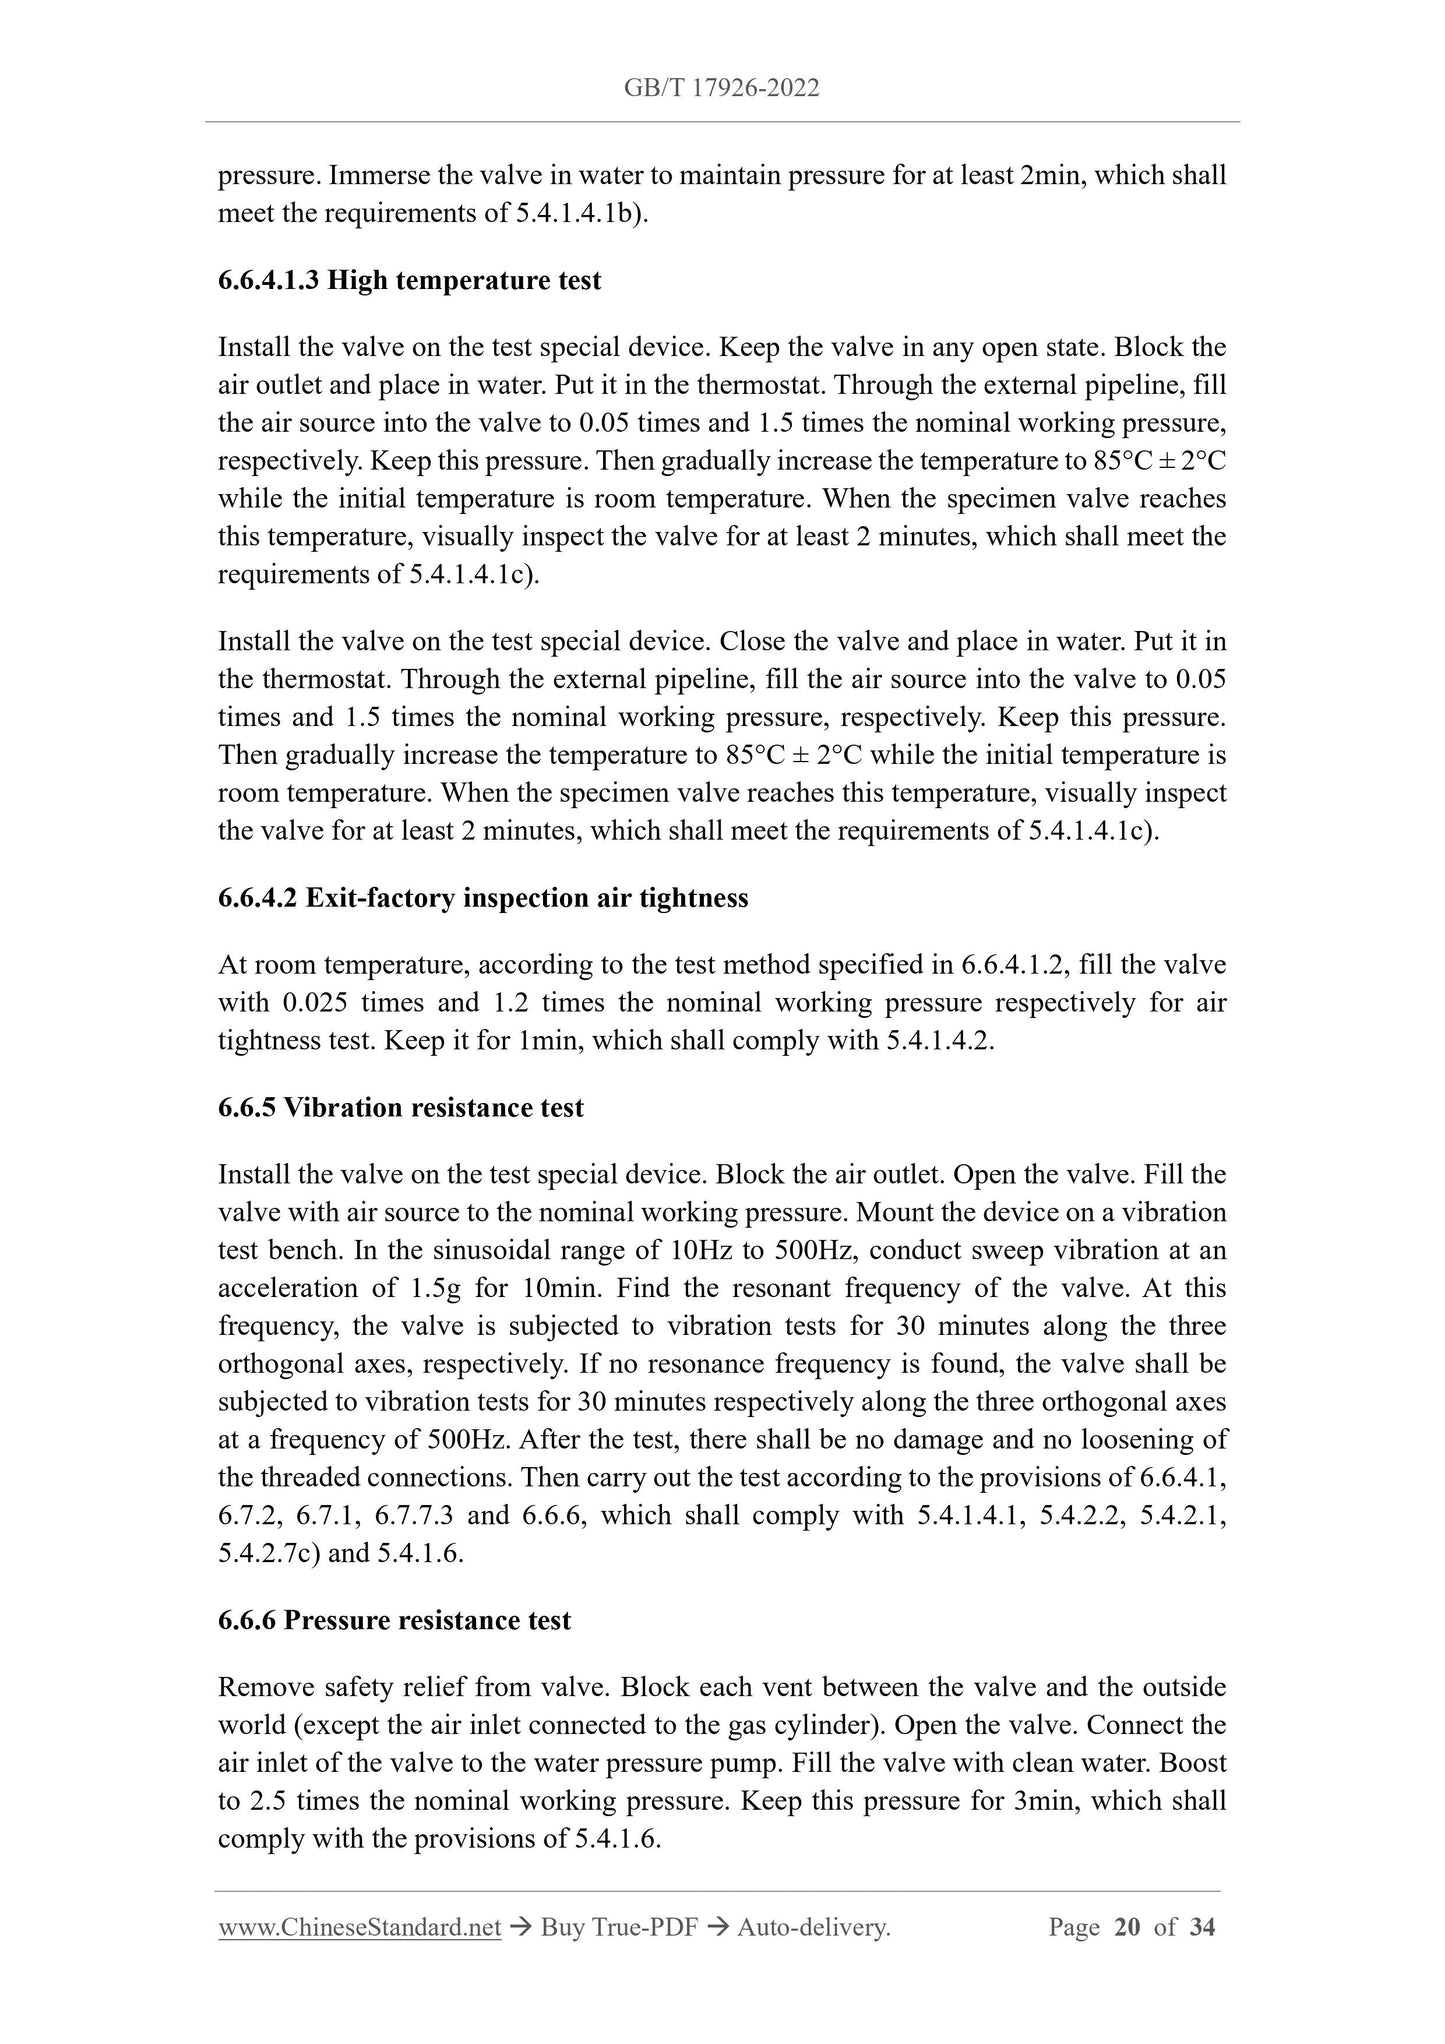 GB/T 17926-2022 Page 10